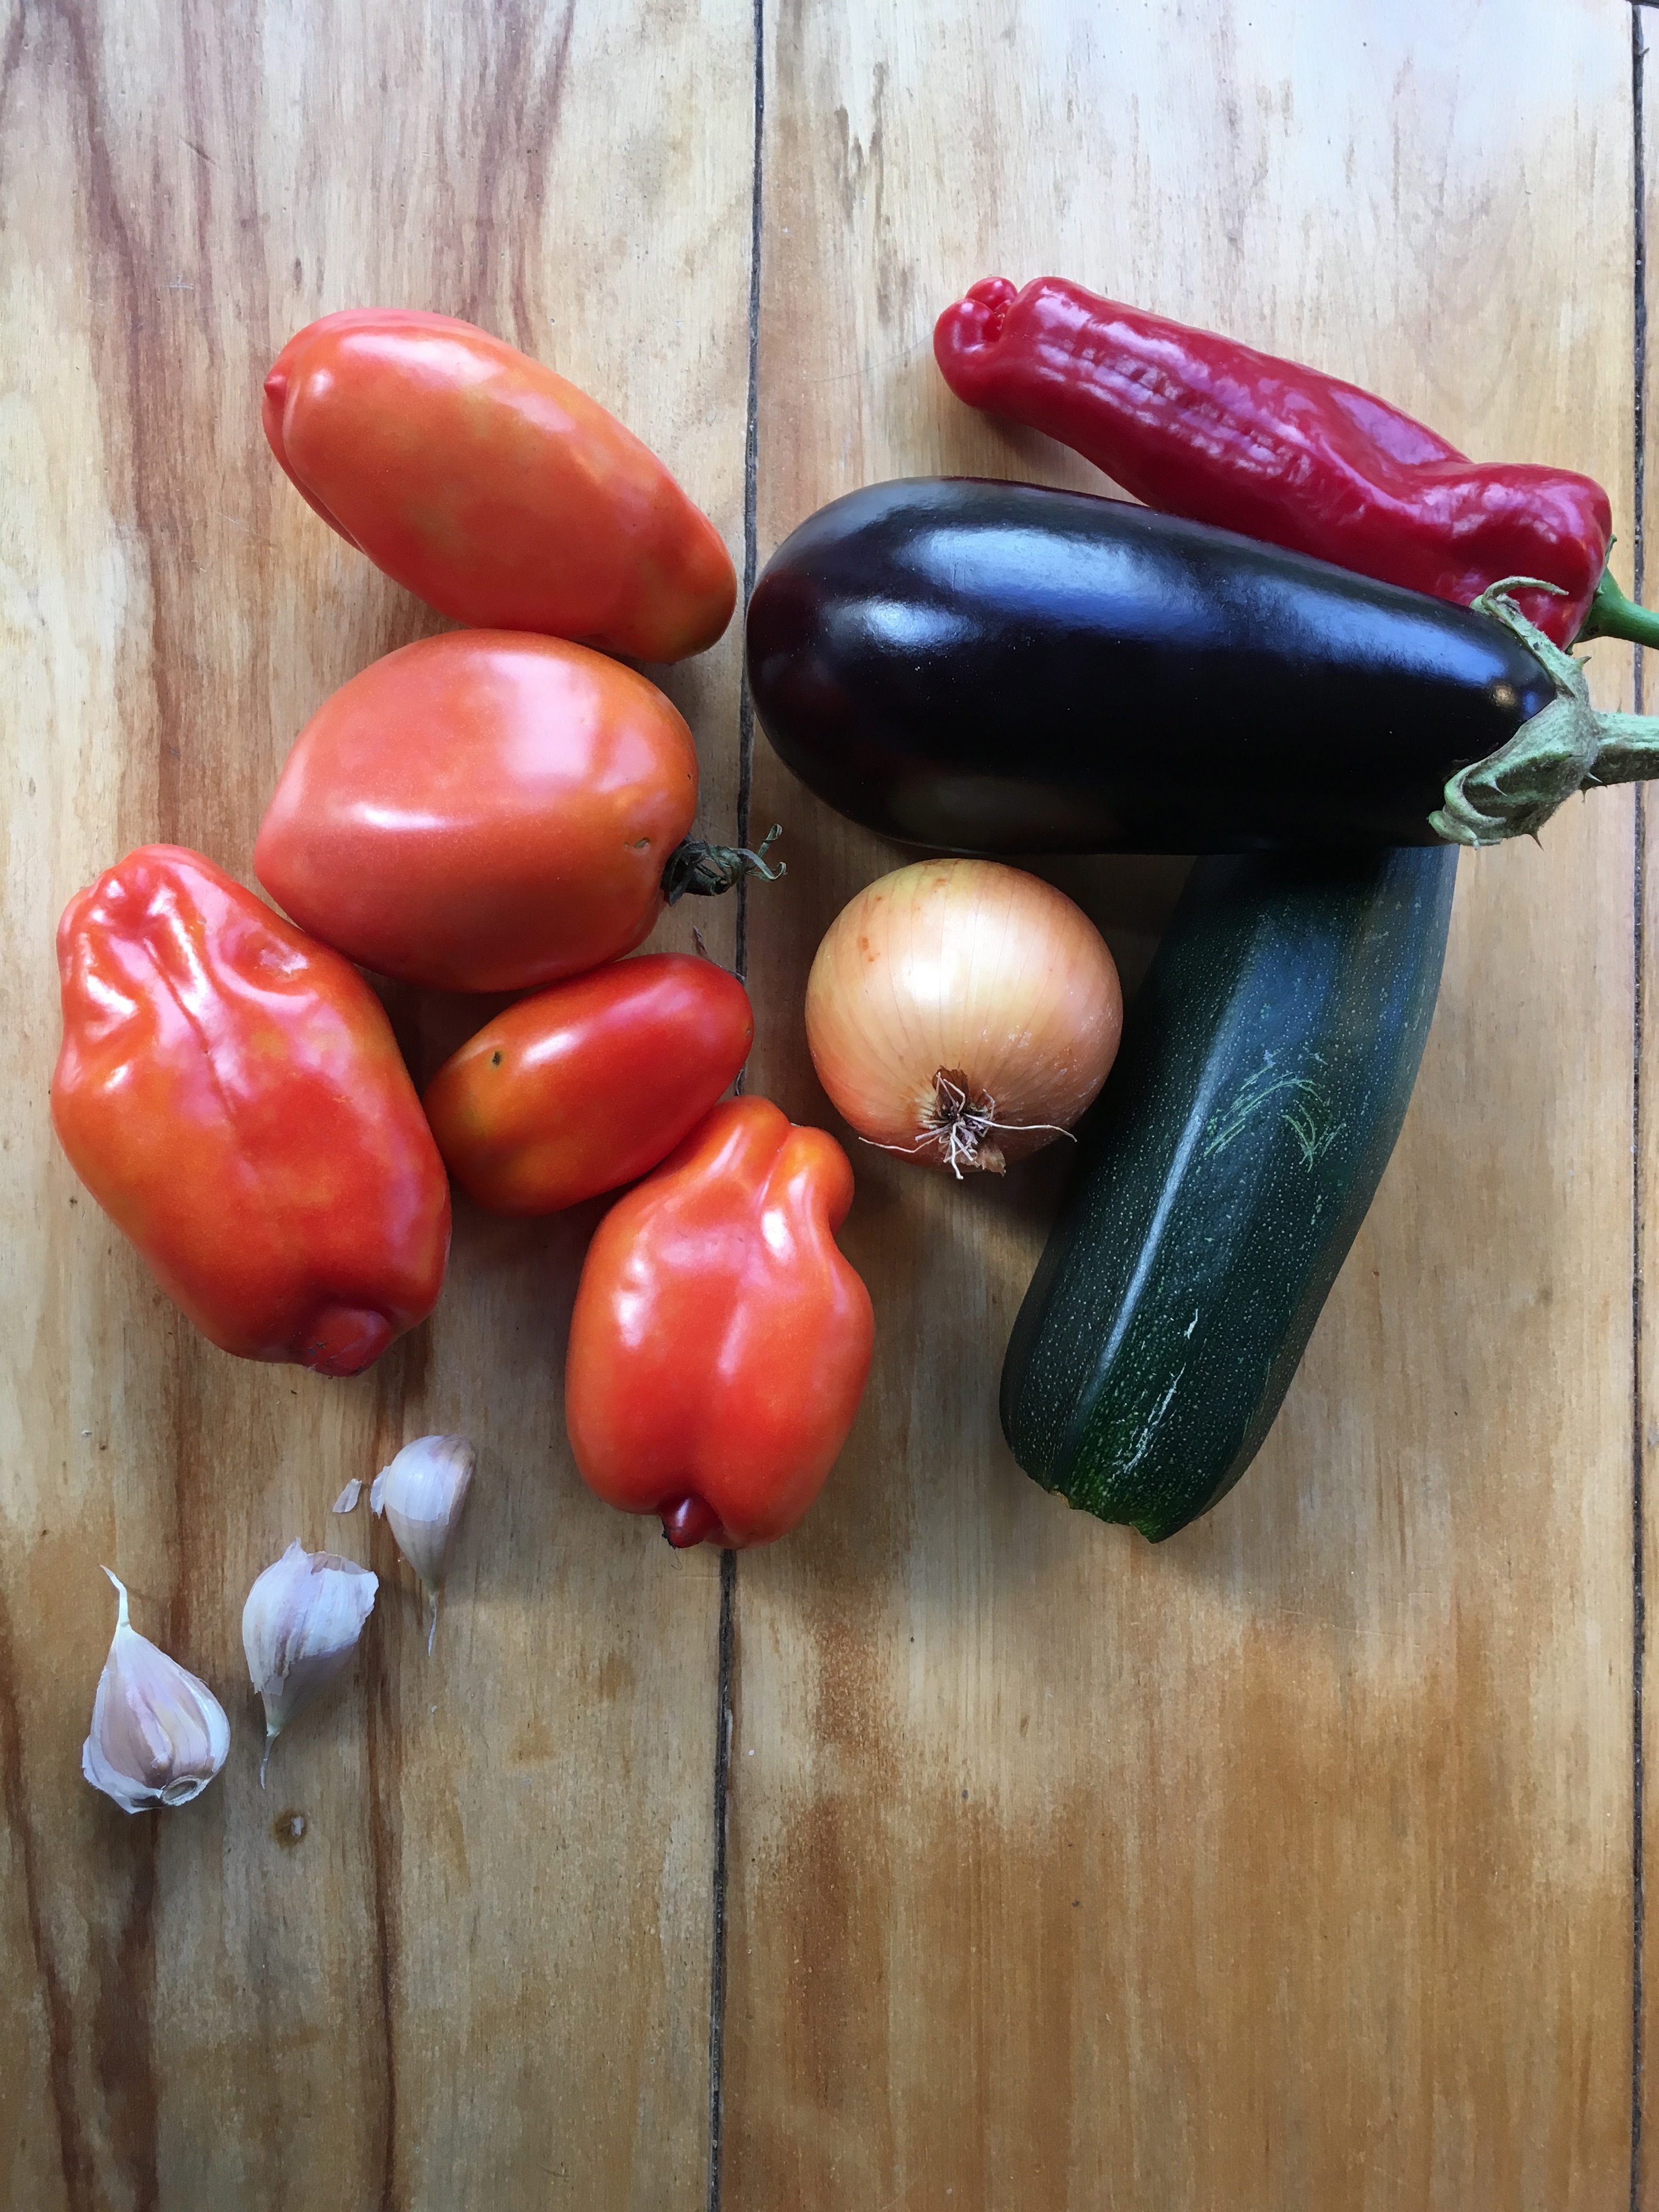 the raw ingredients for ratatouille